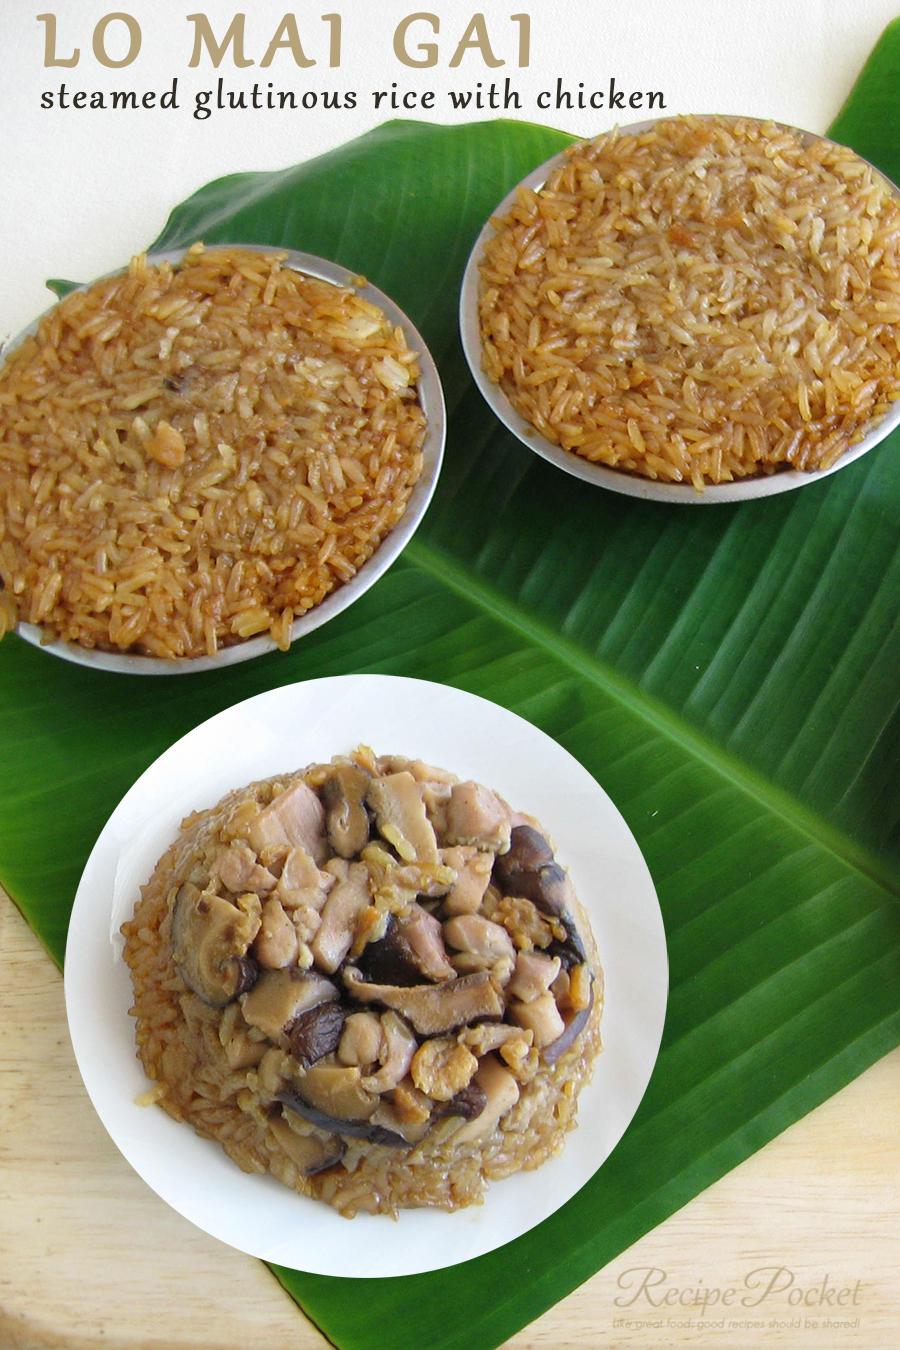 Steamed glutinous rice with chicken - Lo Mai Gai